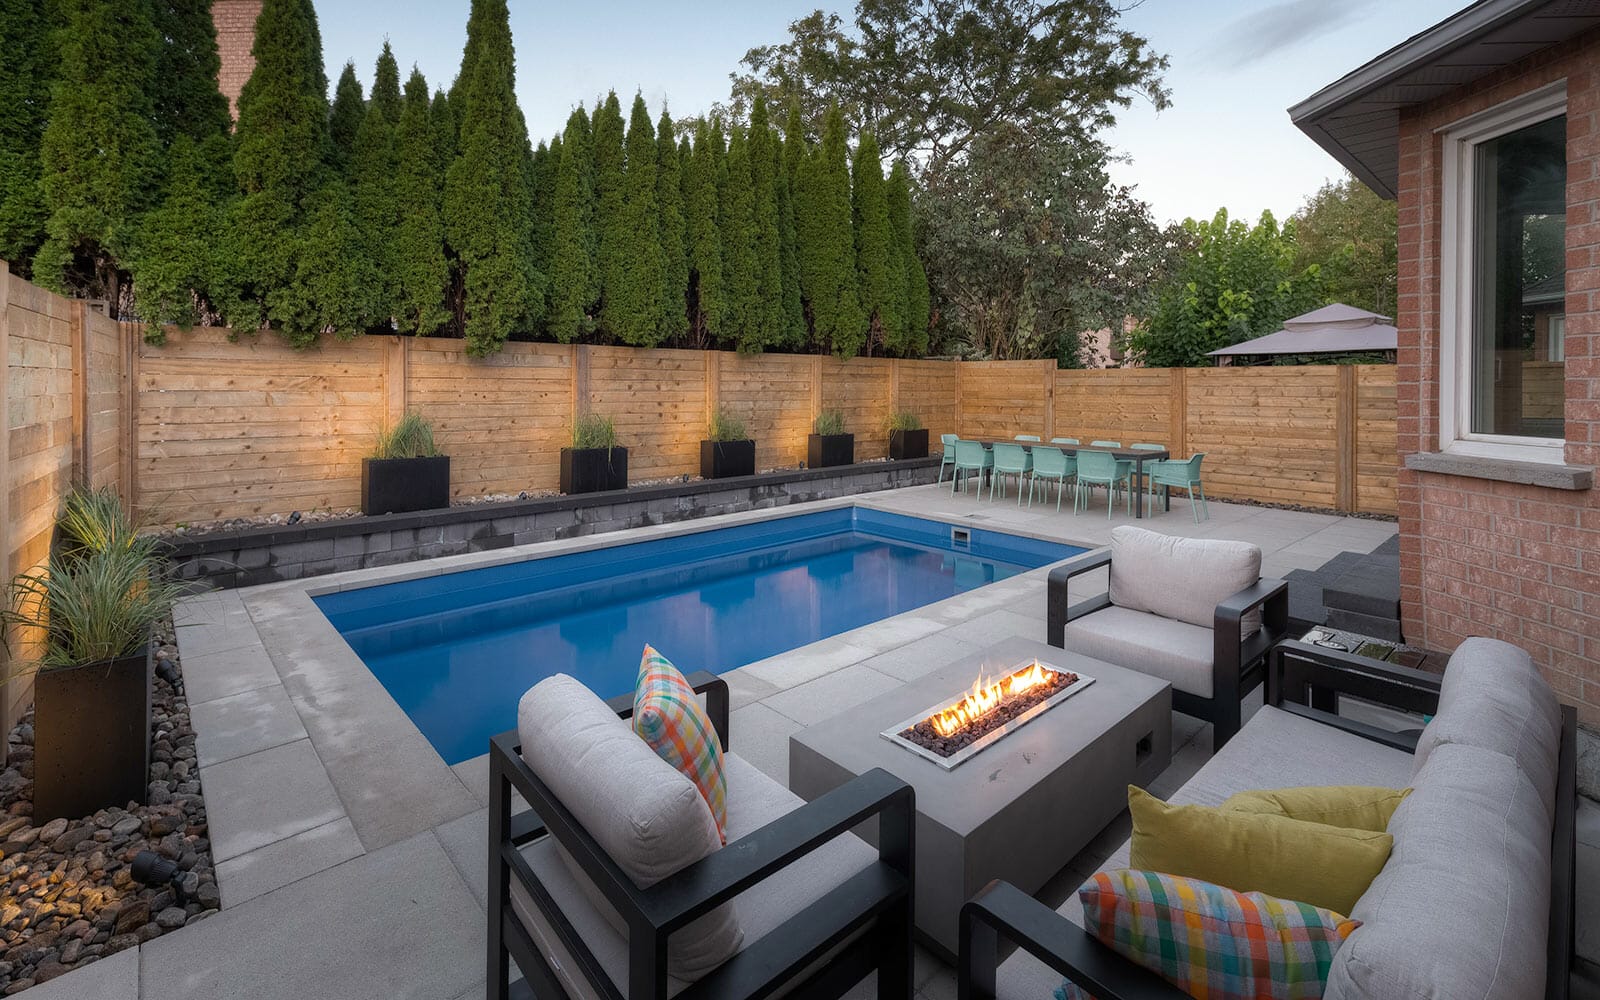 Toronto Landscape Project; Featuring Concrete Pool Installation, Cedar Privacy Fence, Outdoor Fireplace, Pool Deck Interlocking & Small Retaining Wall Around Pool Area by Toronto Landscaping Company.